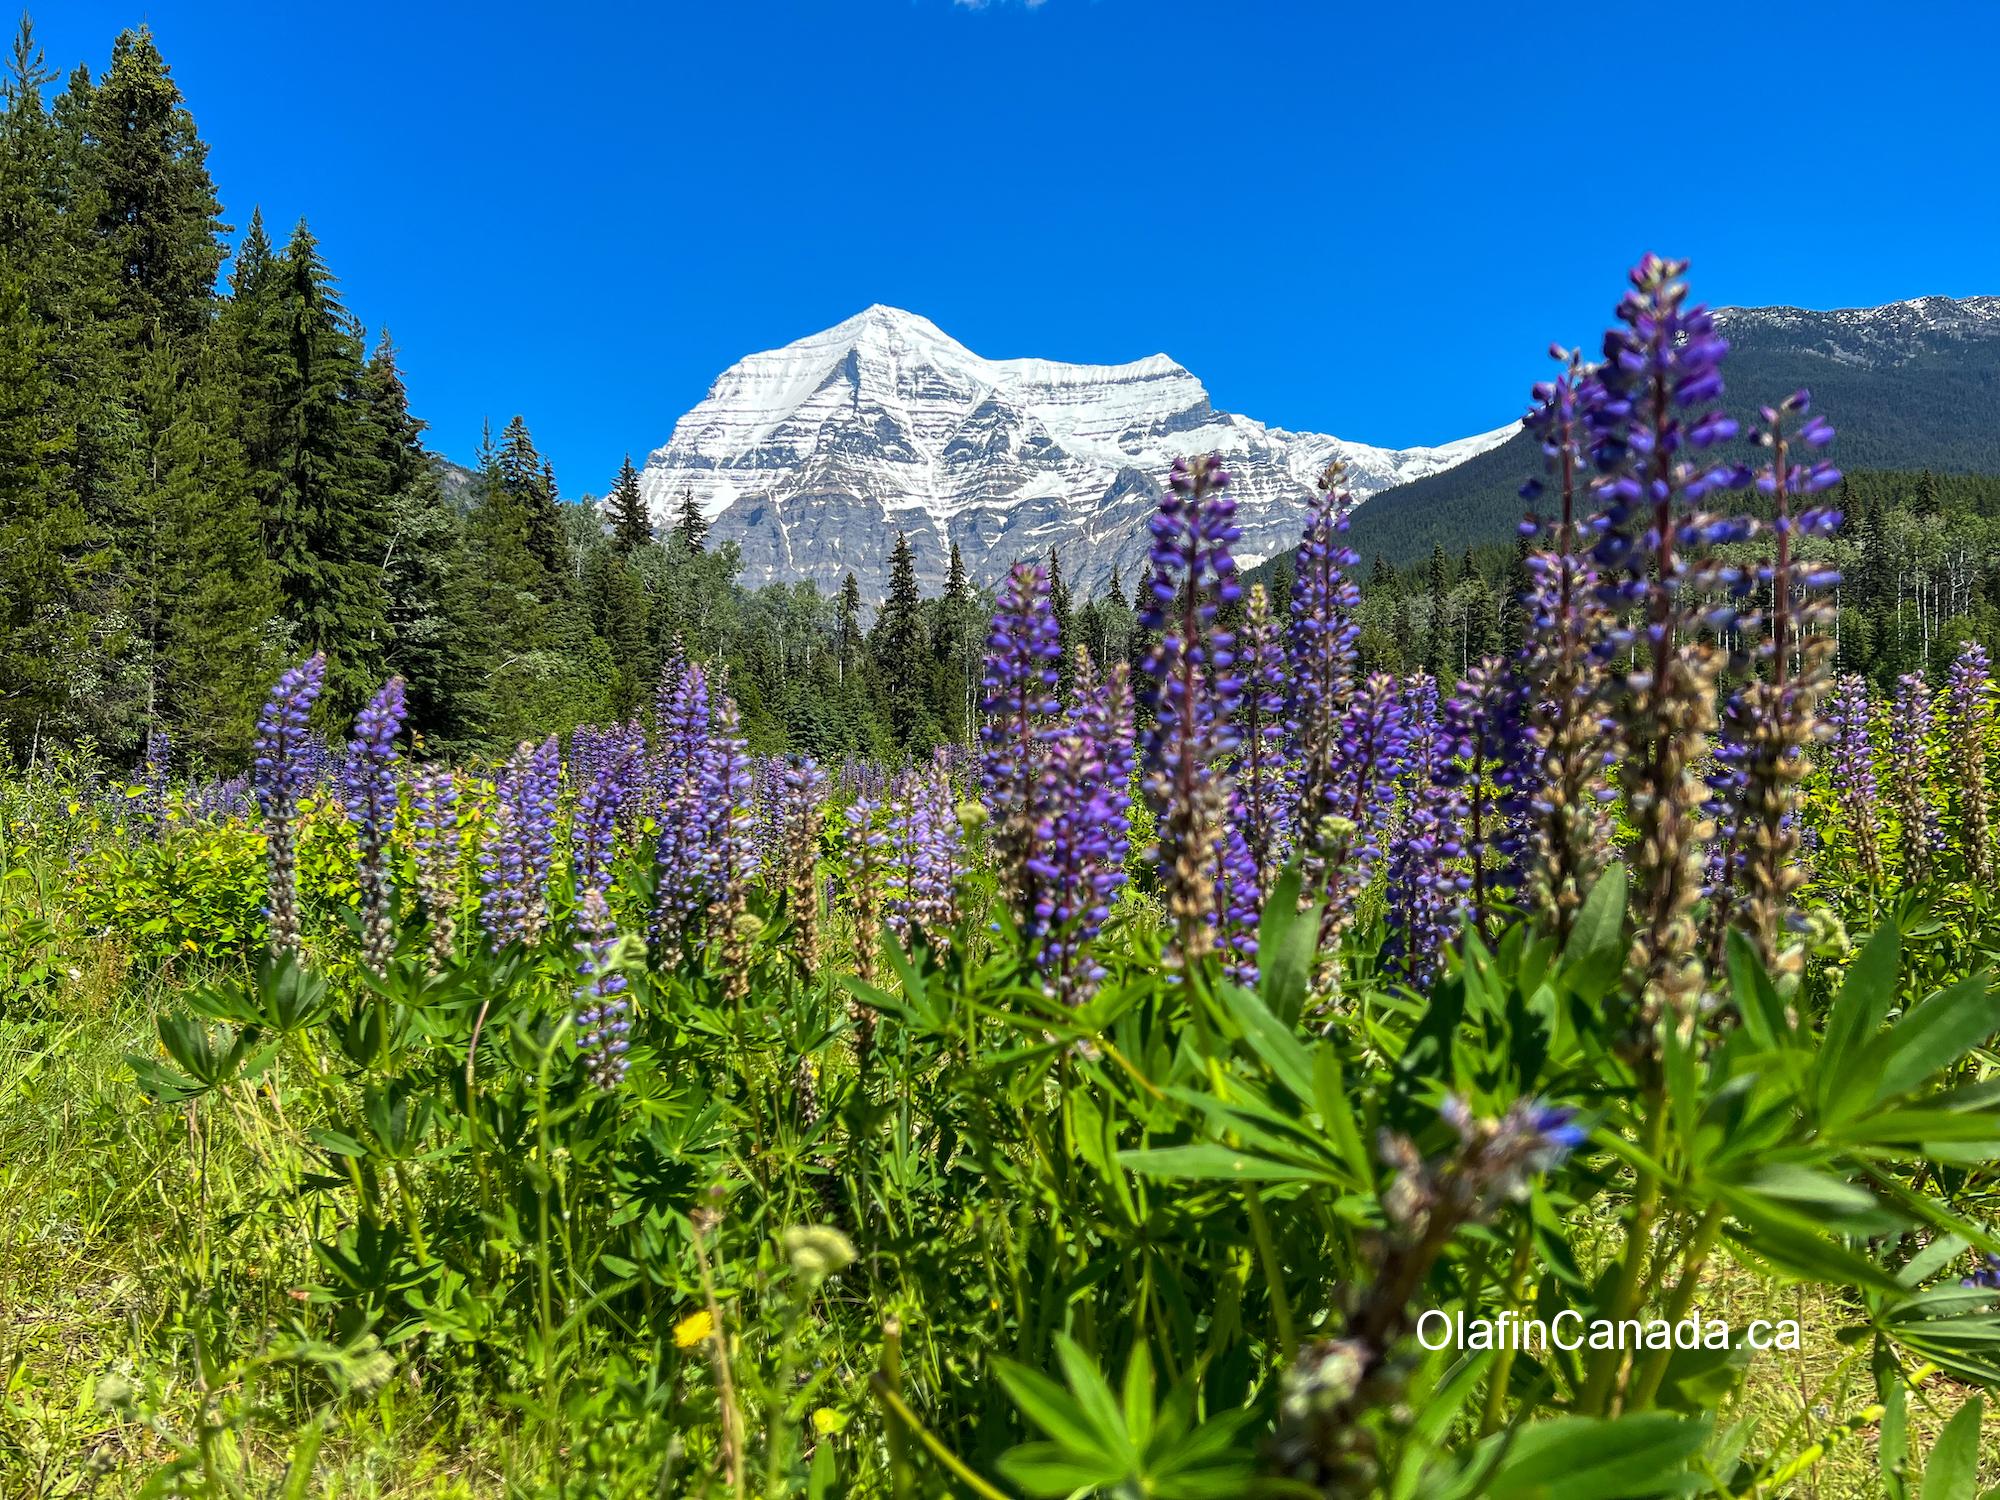 The highest mountain in the Canadian Rockies is Mount Robson, in British Columbia. #olafincanada #mountrobson #rockies #sunshine #wildflowers